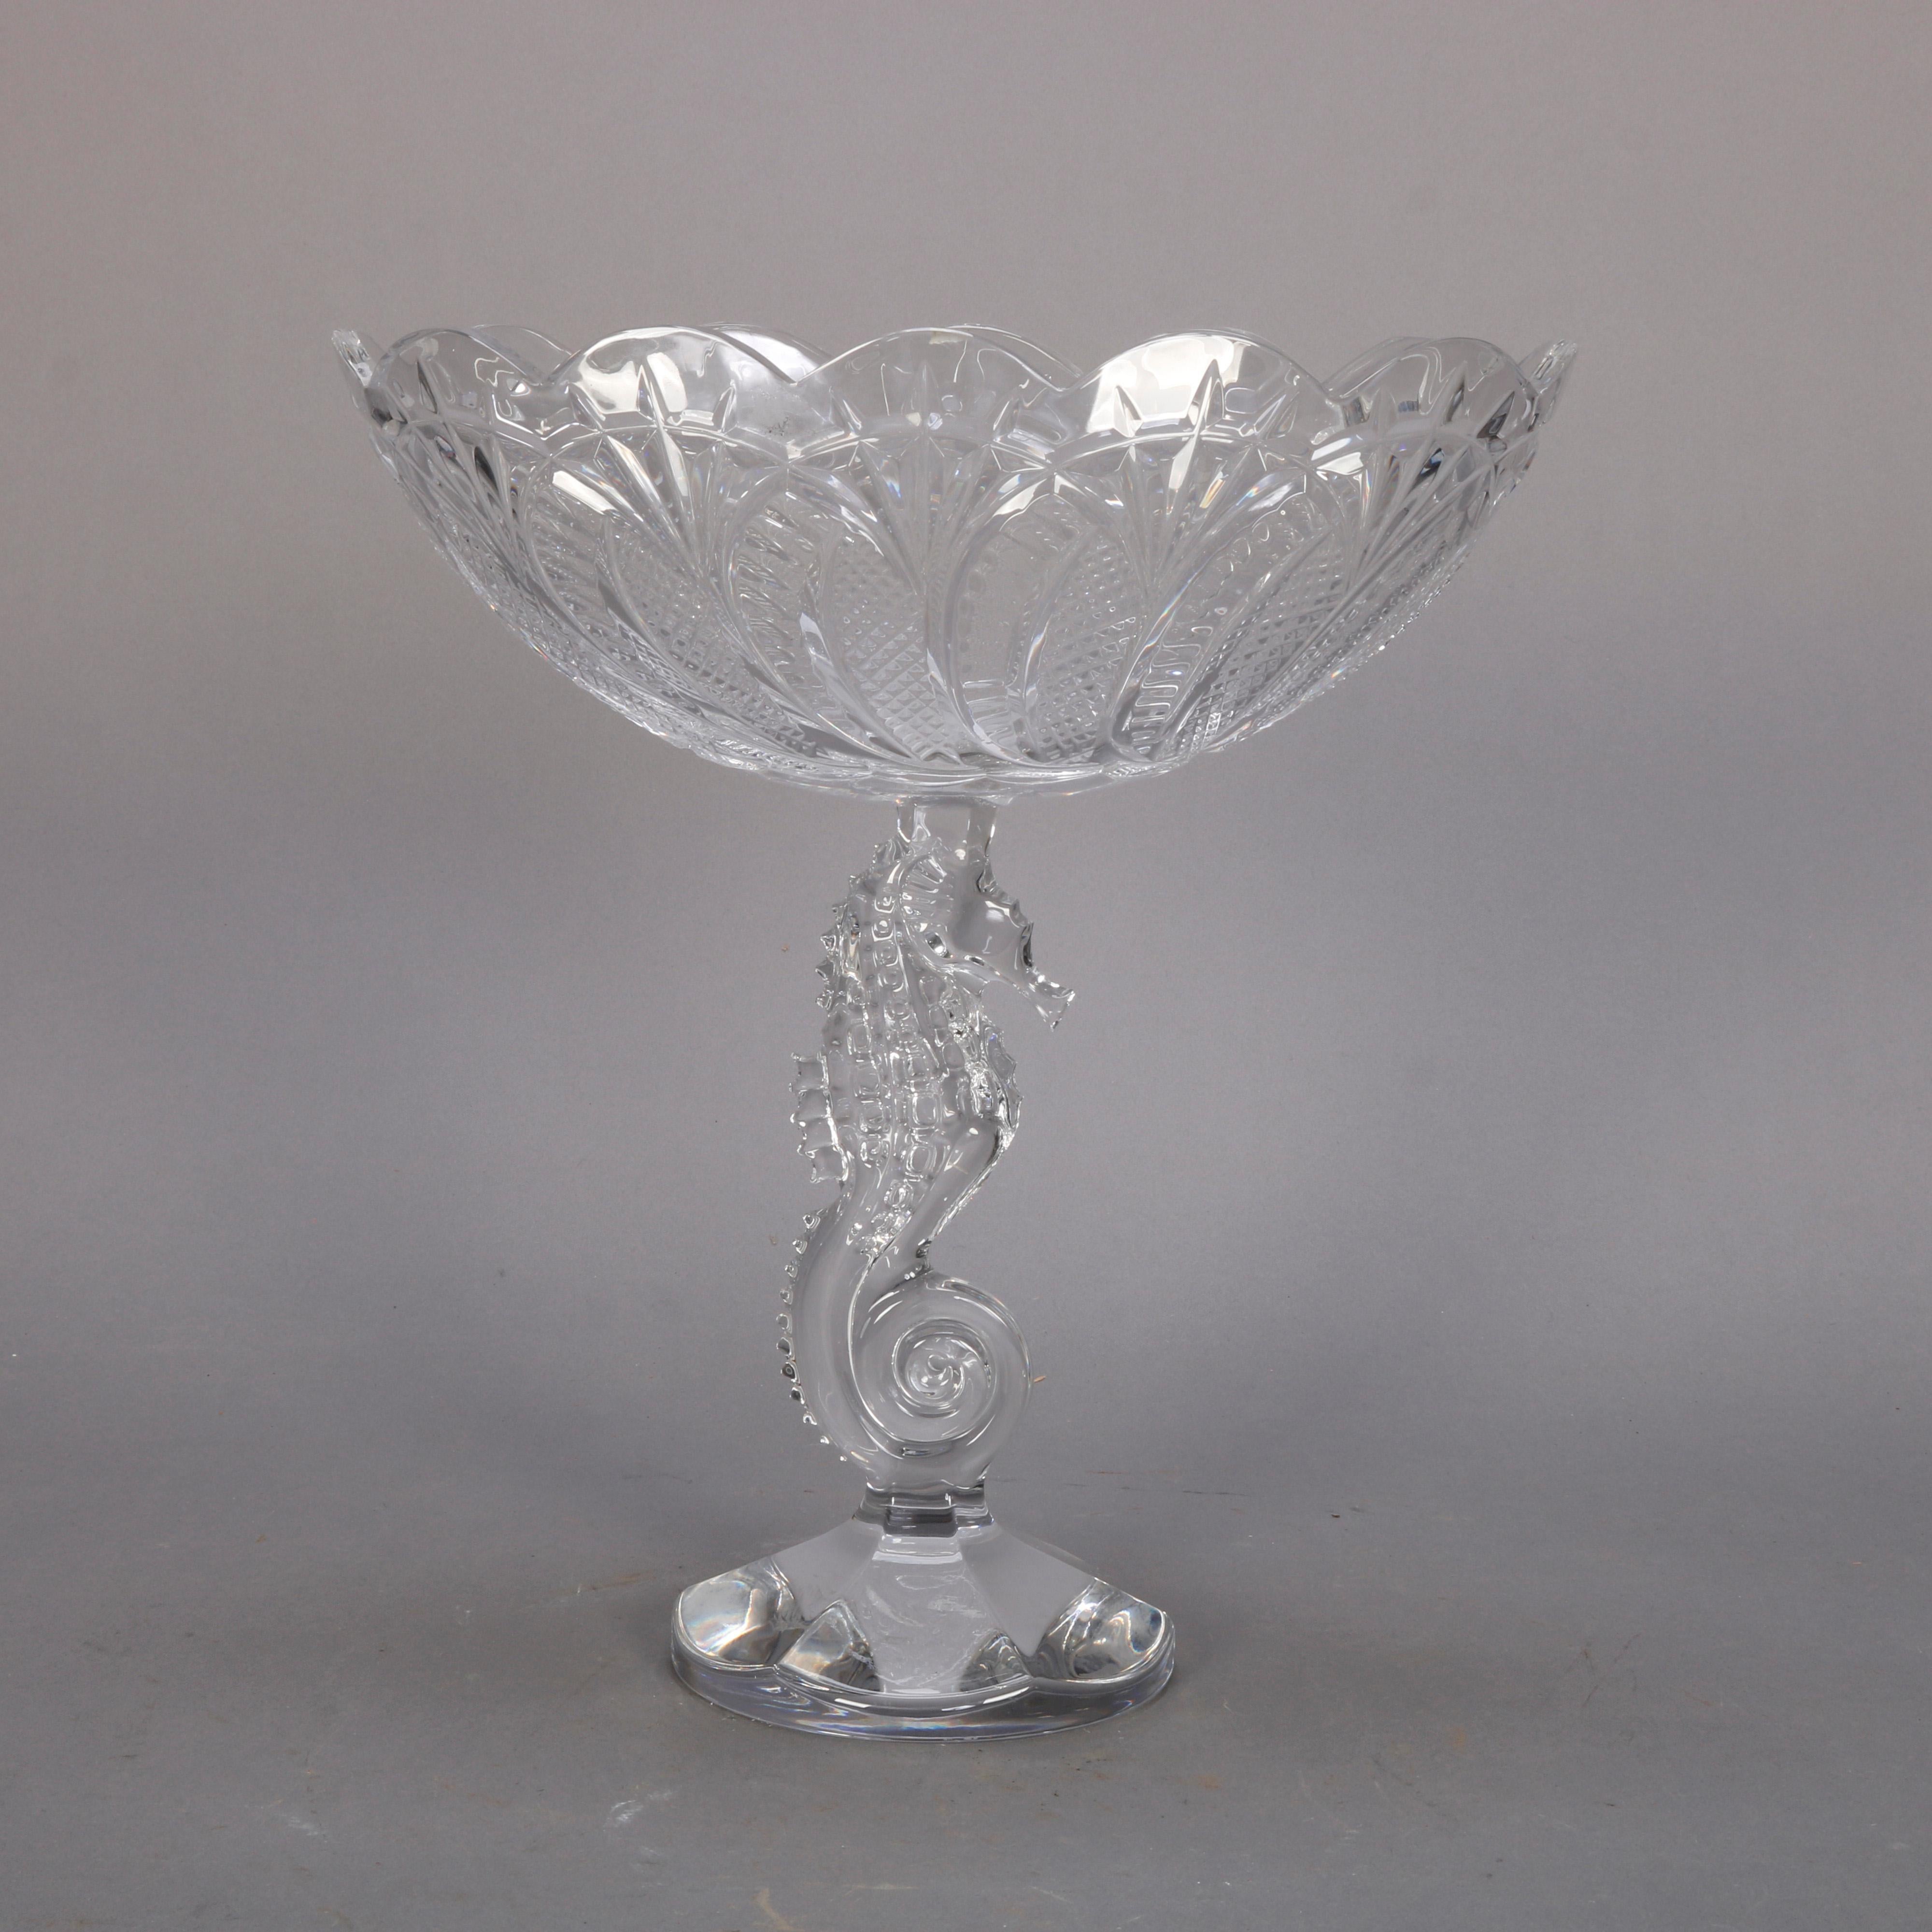 An Irish Waterford cut crystal figural compote offers cabbage leaf oval bowl surmounting seahorse column raised on faceted base, signed on base as photographed, 20th century

DELIVERY NOTICE – Due to COVID-19 we are employing NO-CONTACT PRACTICES in